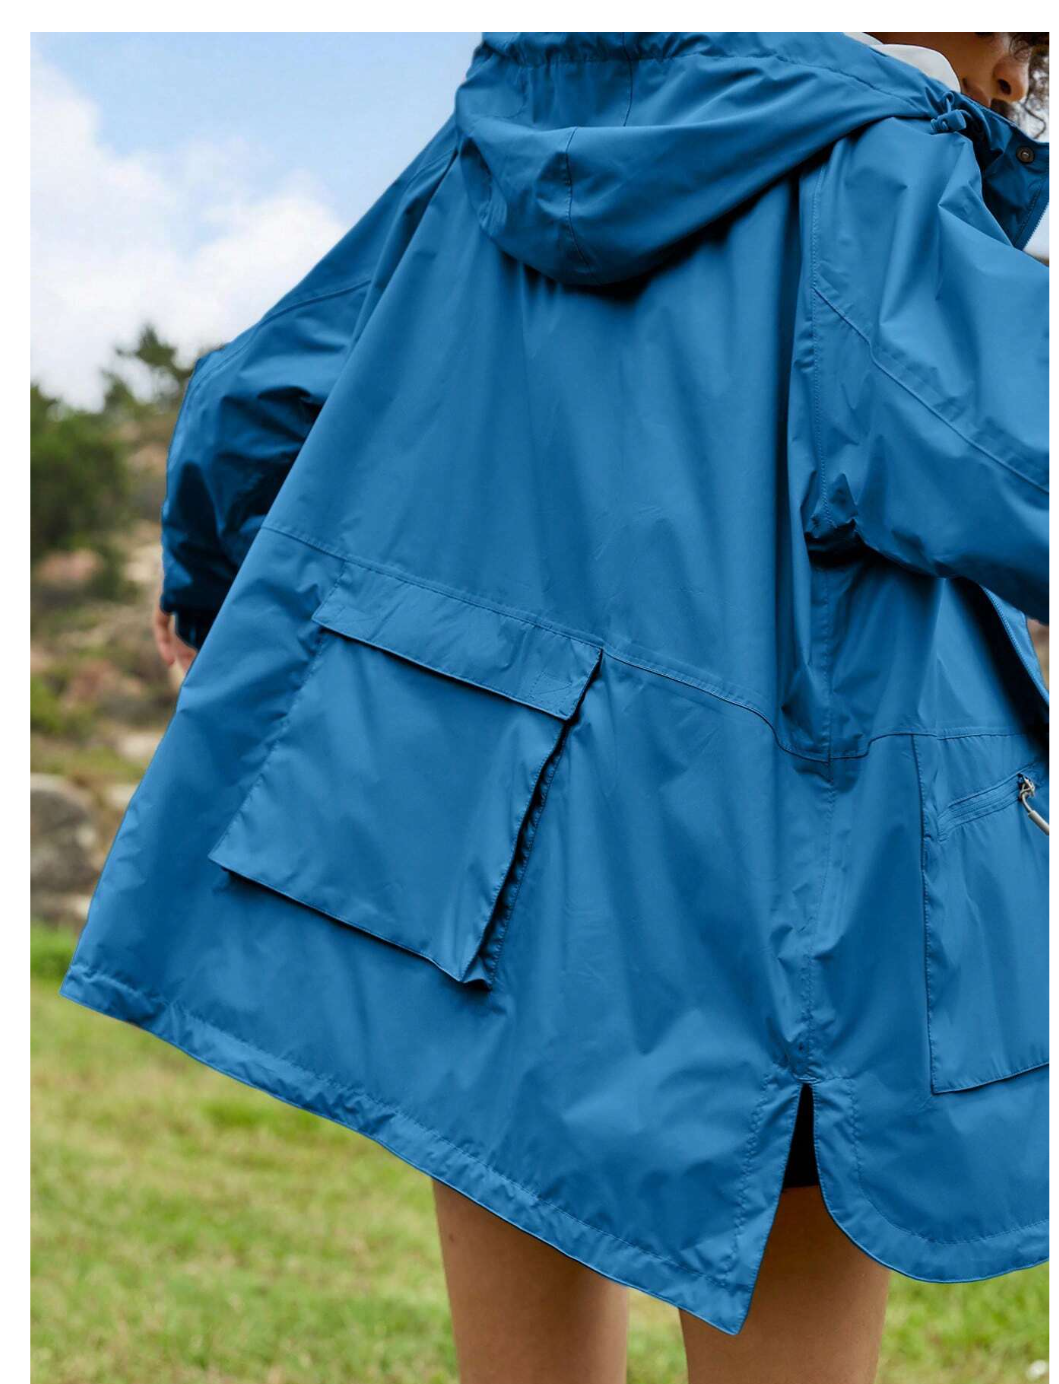 Embrace the Elements in Style: My Nature Women's Hooded Waterproof Windbreaker for Hiking, Sports, and Urban Adventures!